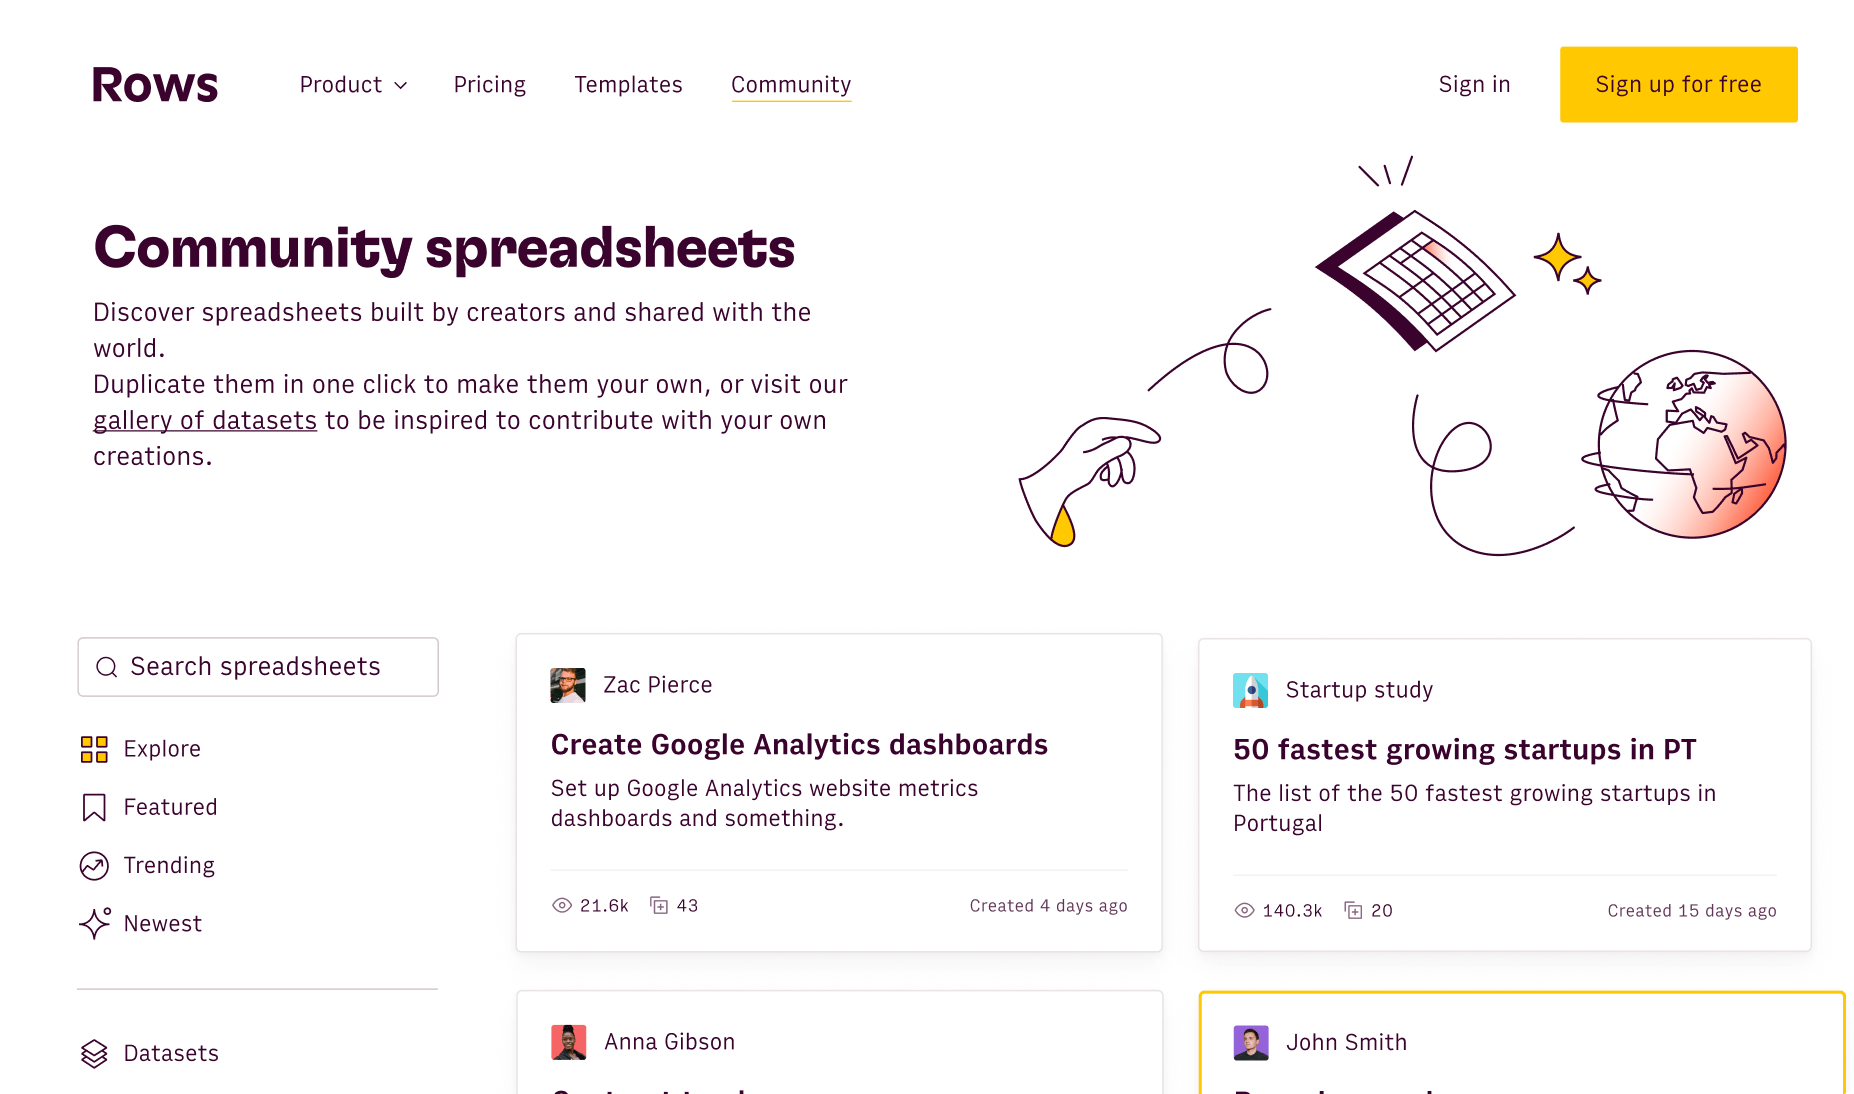 Get inspired by spreadsheets made by community